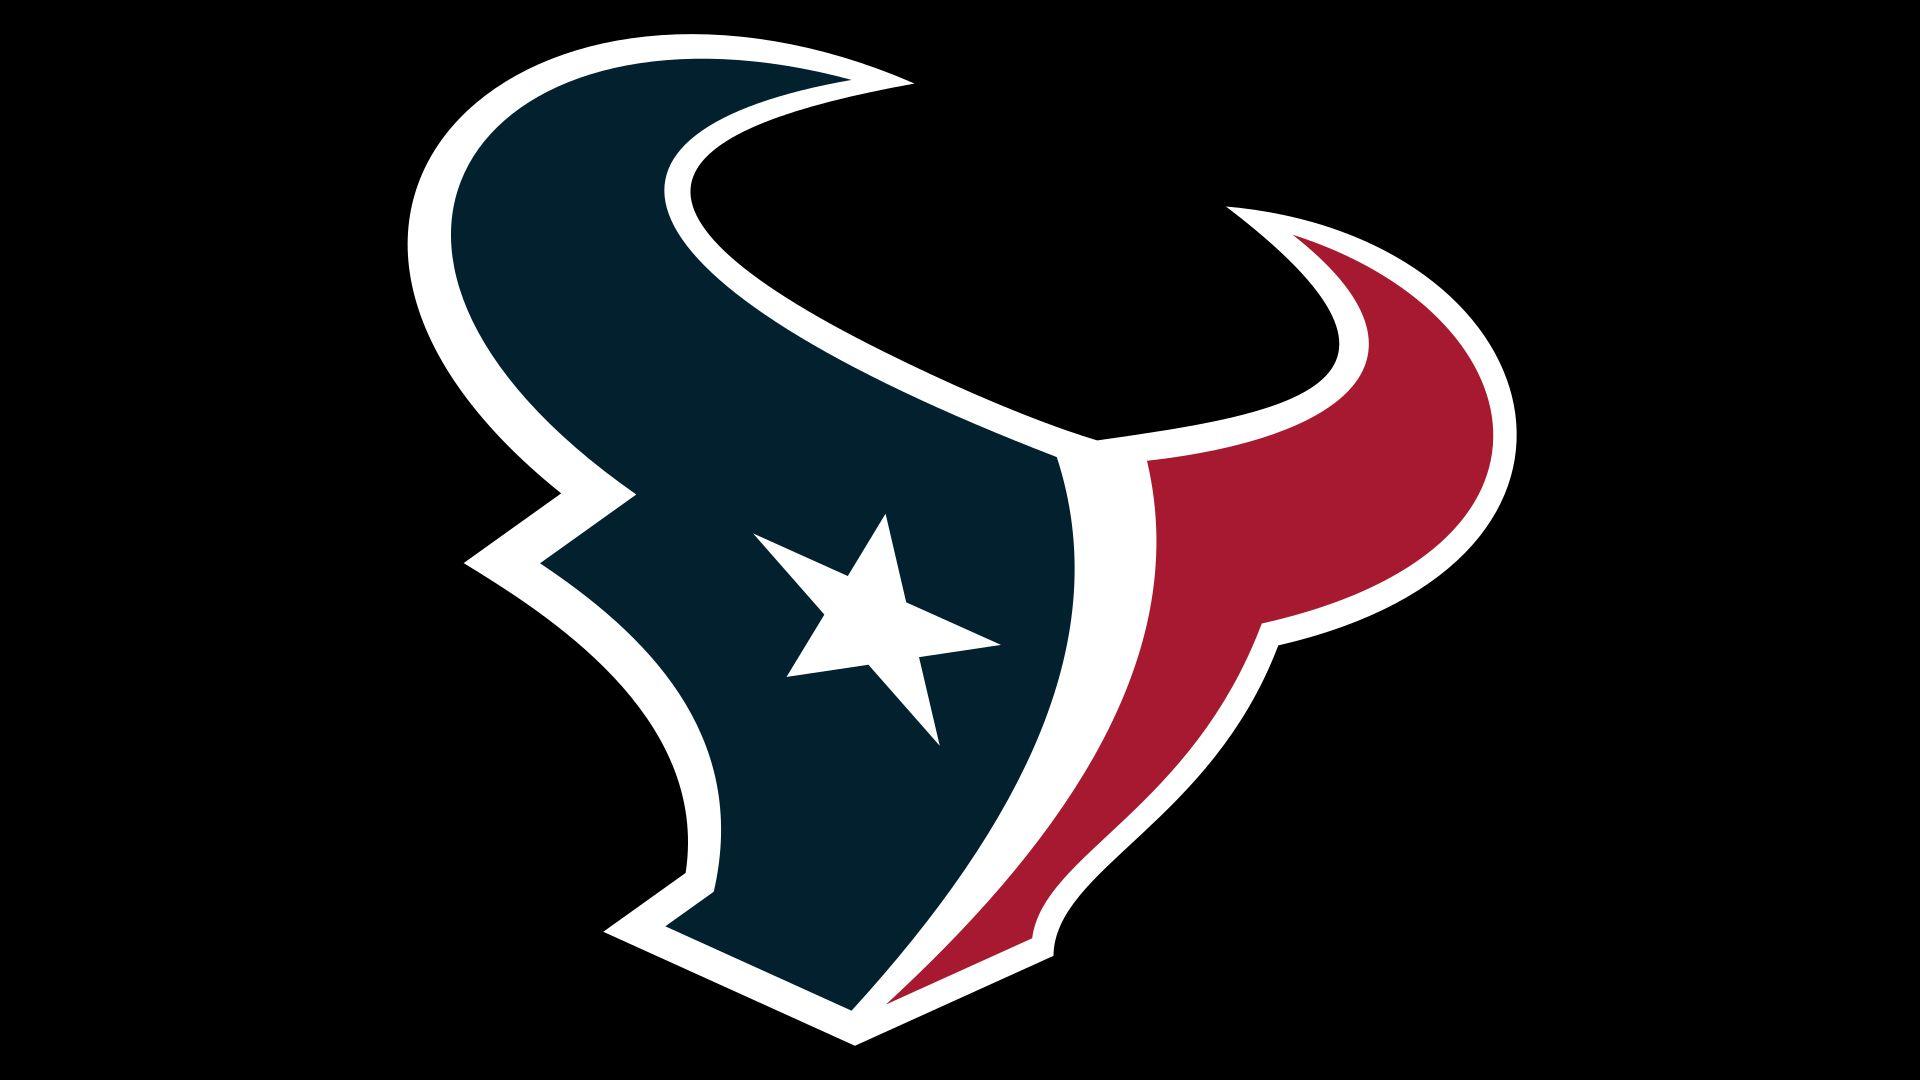 Red H Football Logo - Texans Logo, Texans Symbol, Meaning, History and Evolution